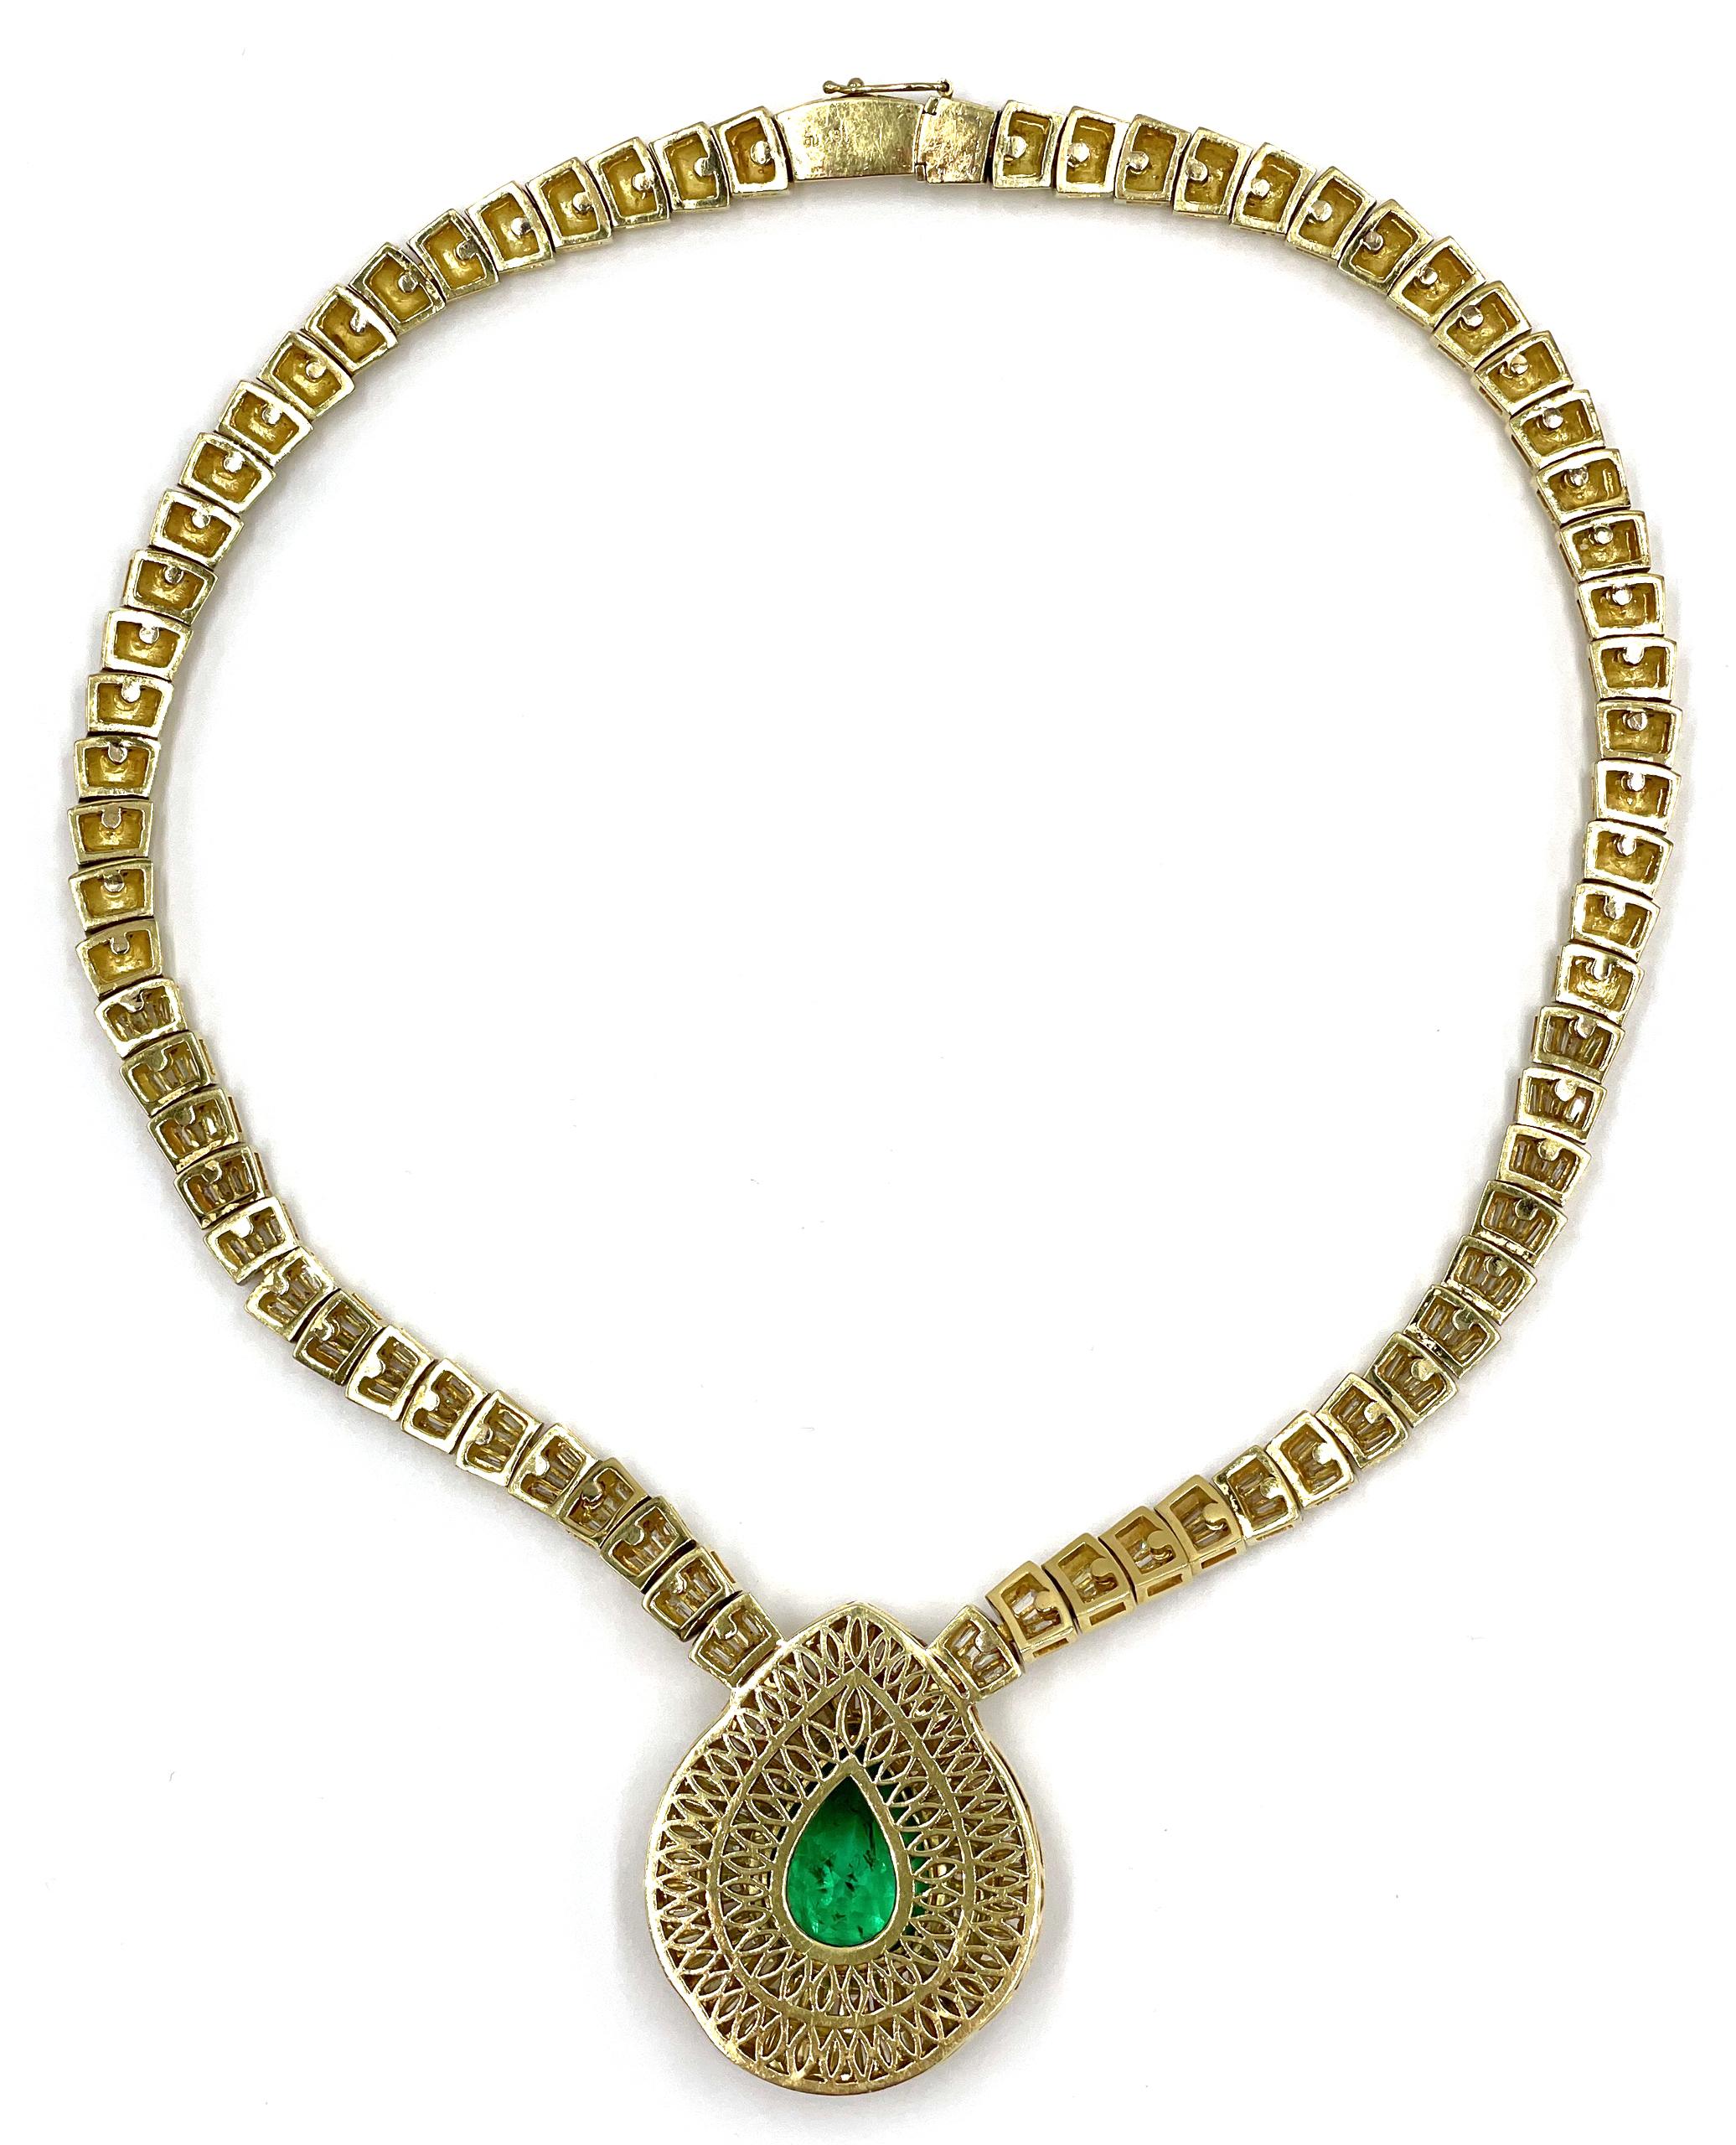 Pear Cut Pear Shape Colombian Emerald Necklace - 18.44 Carat - 18k Yellow Gold For Sale